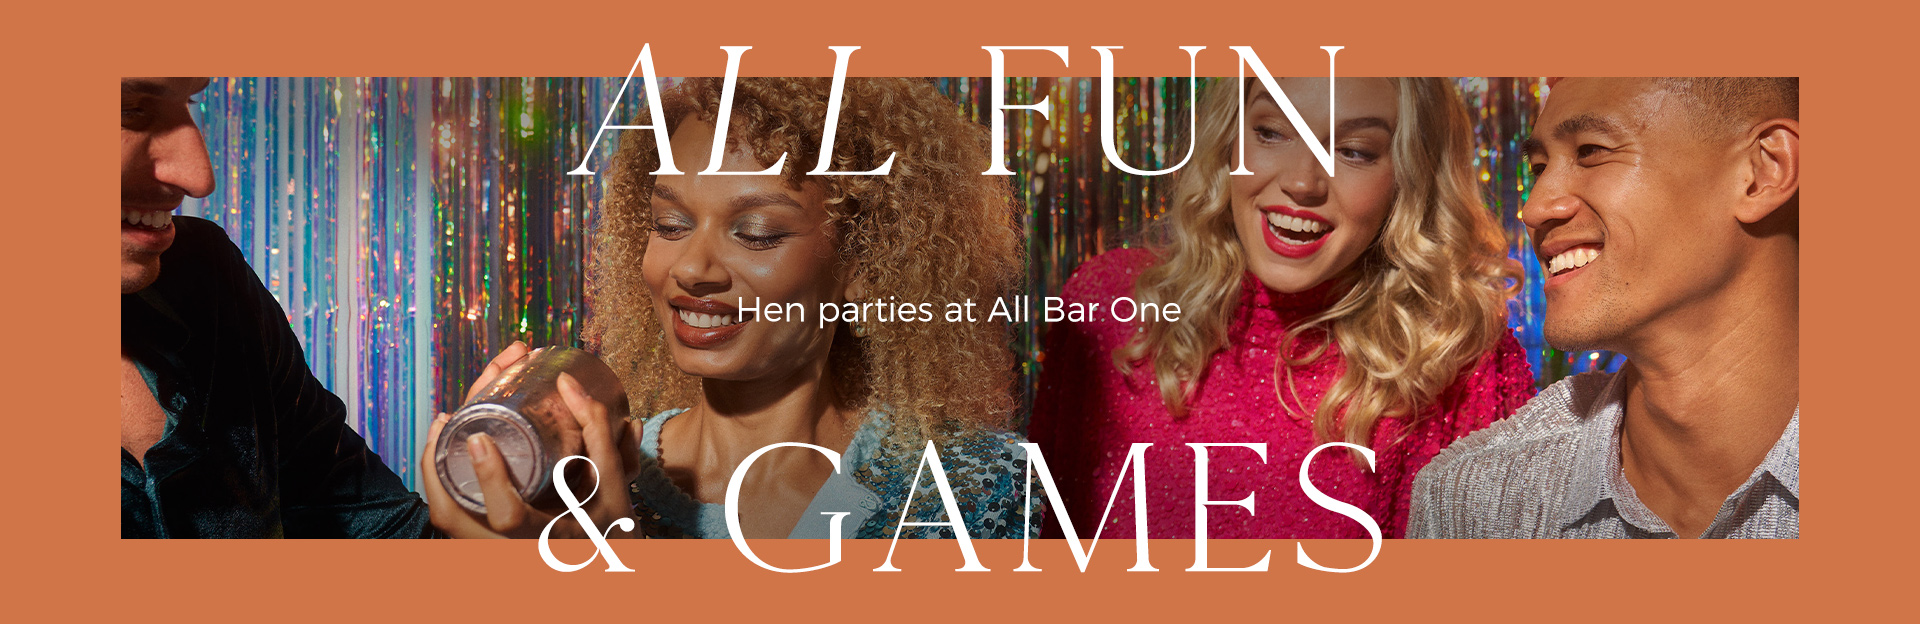 Hen parties at All Bar One New Street Station